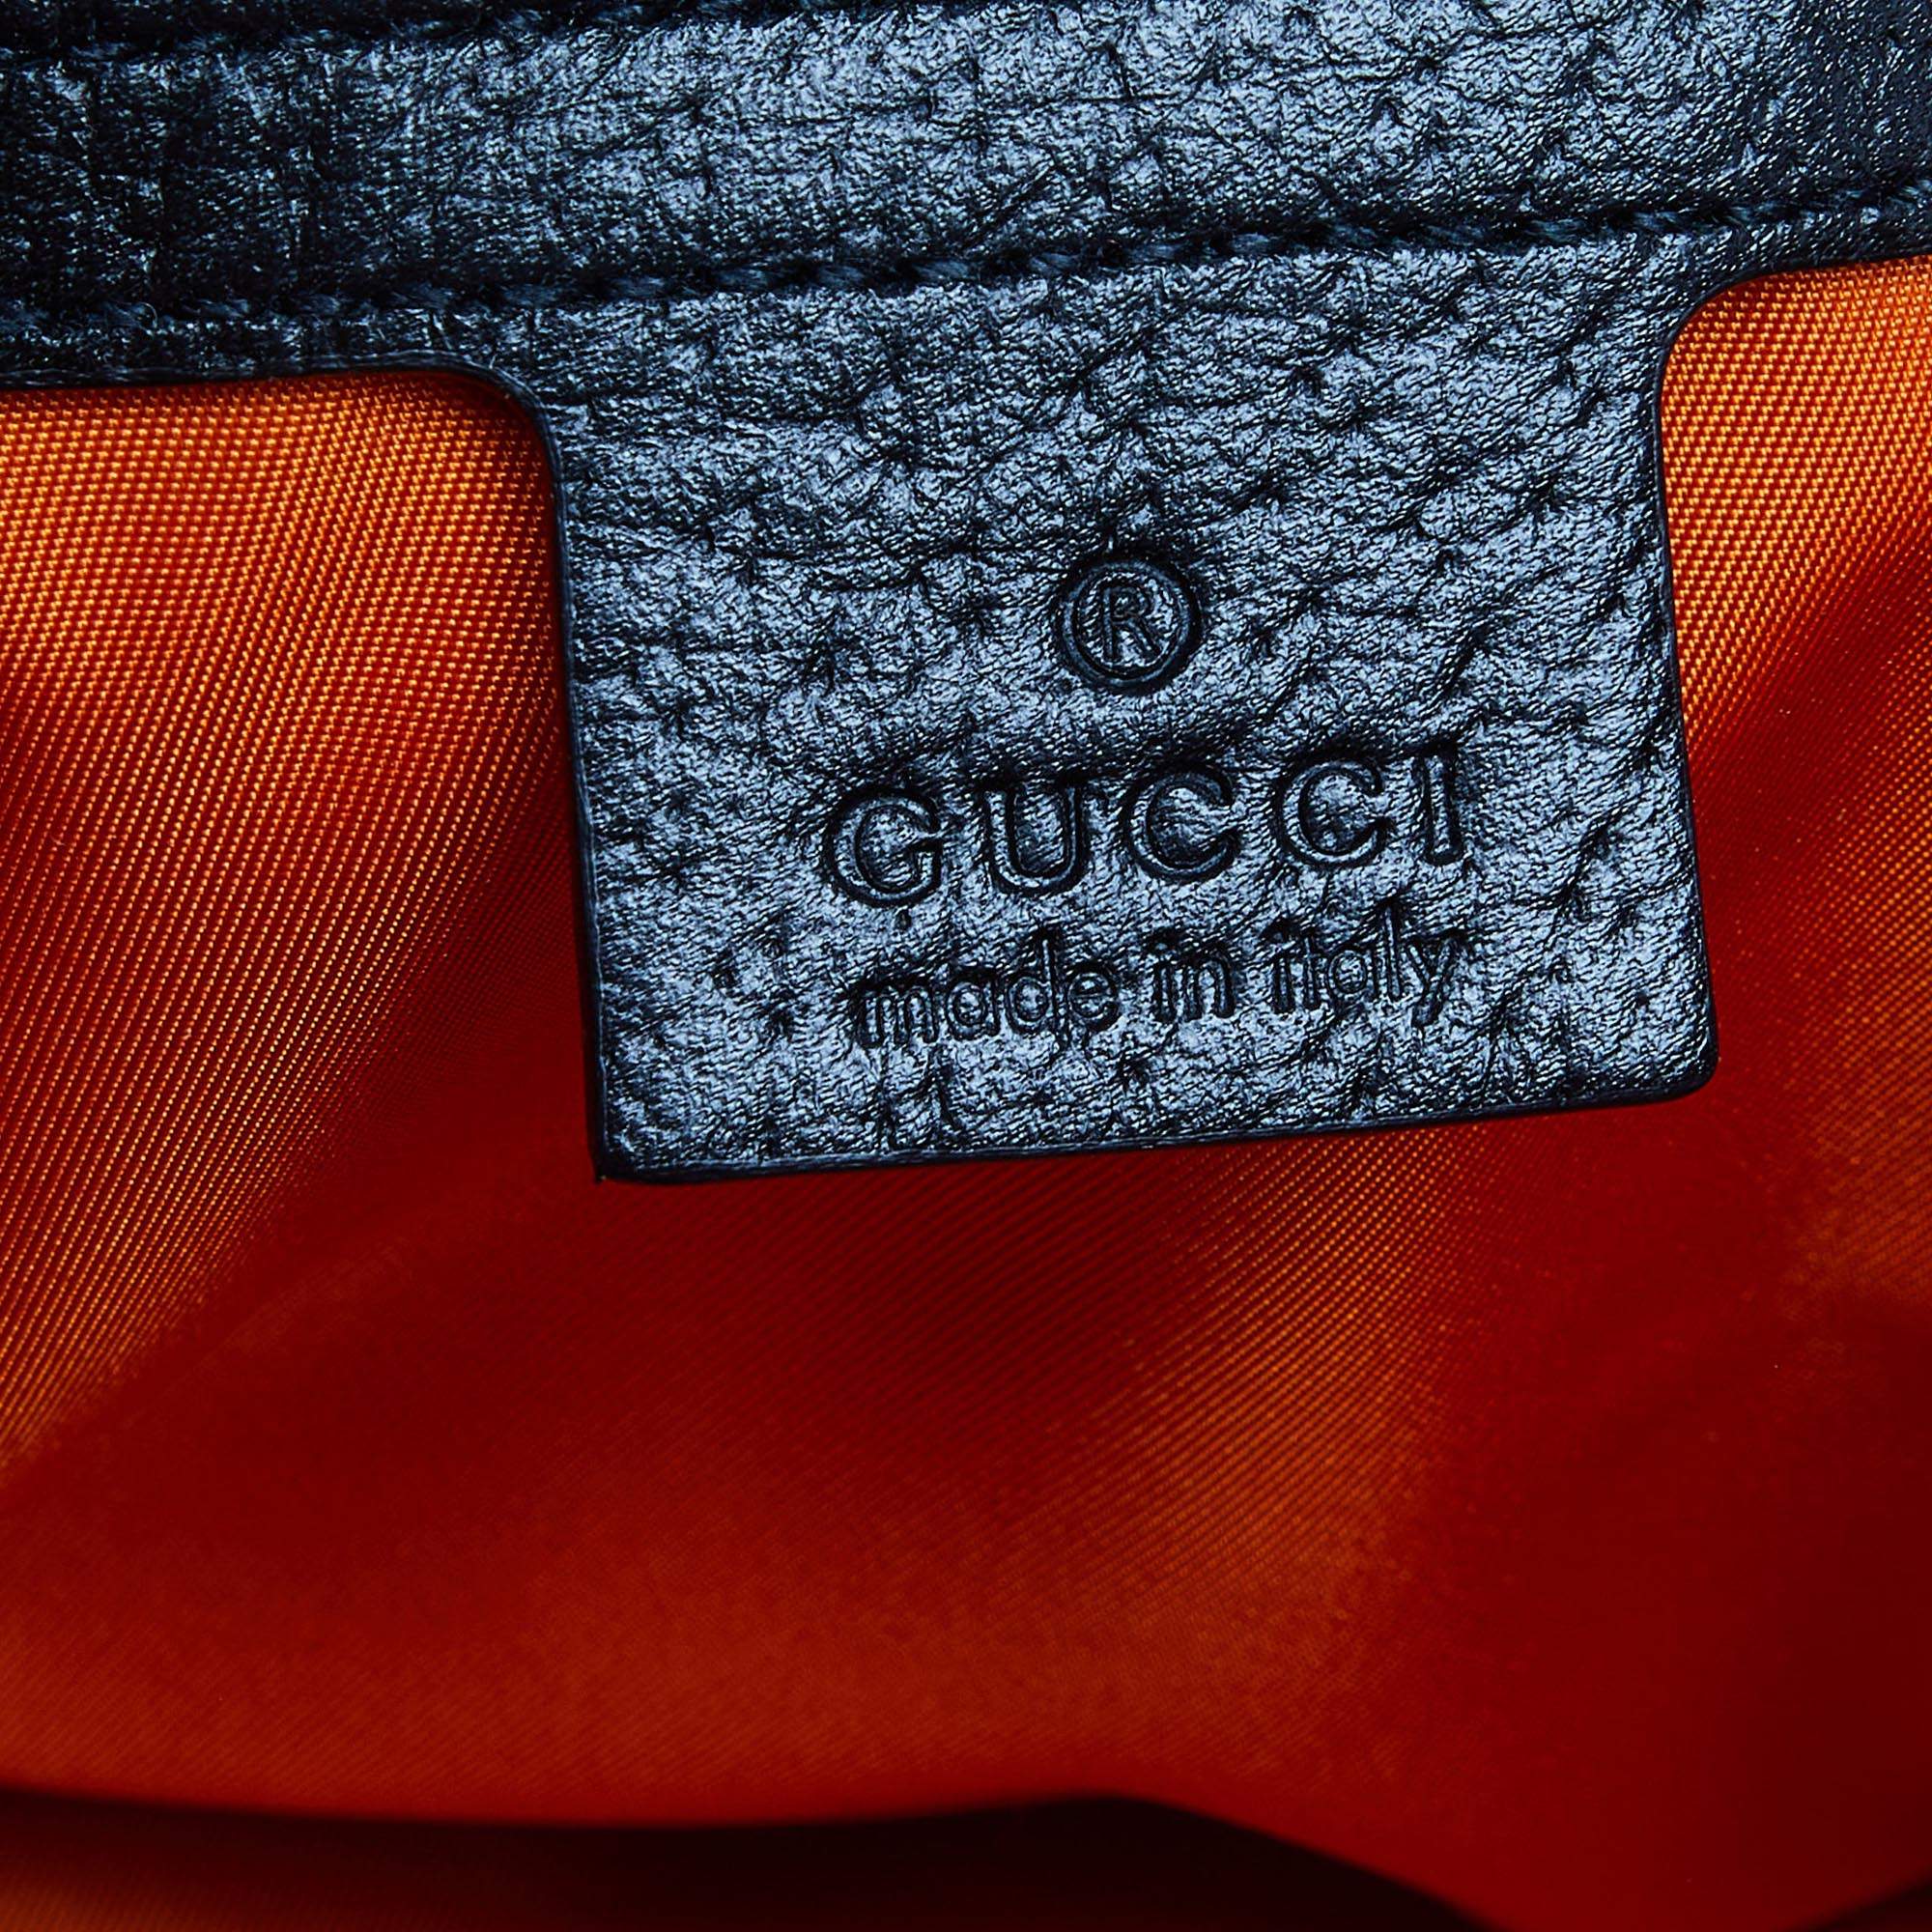 Backpack Gucci Orange in Polyester - 25640066